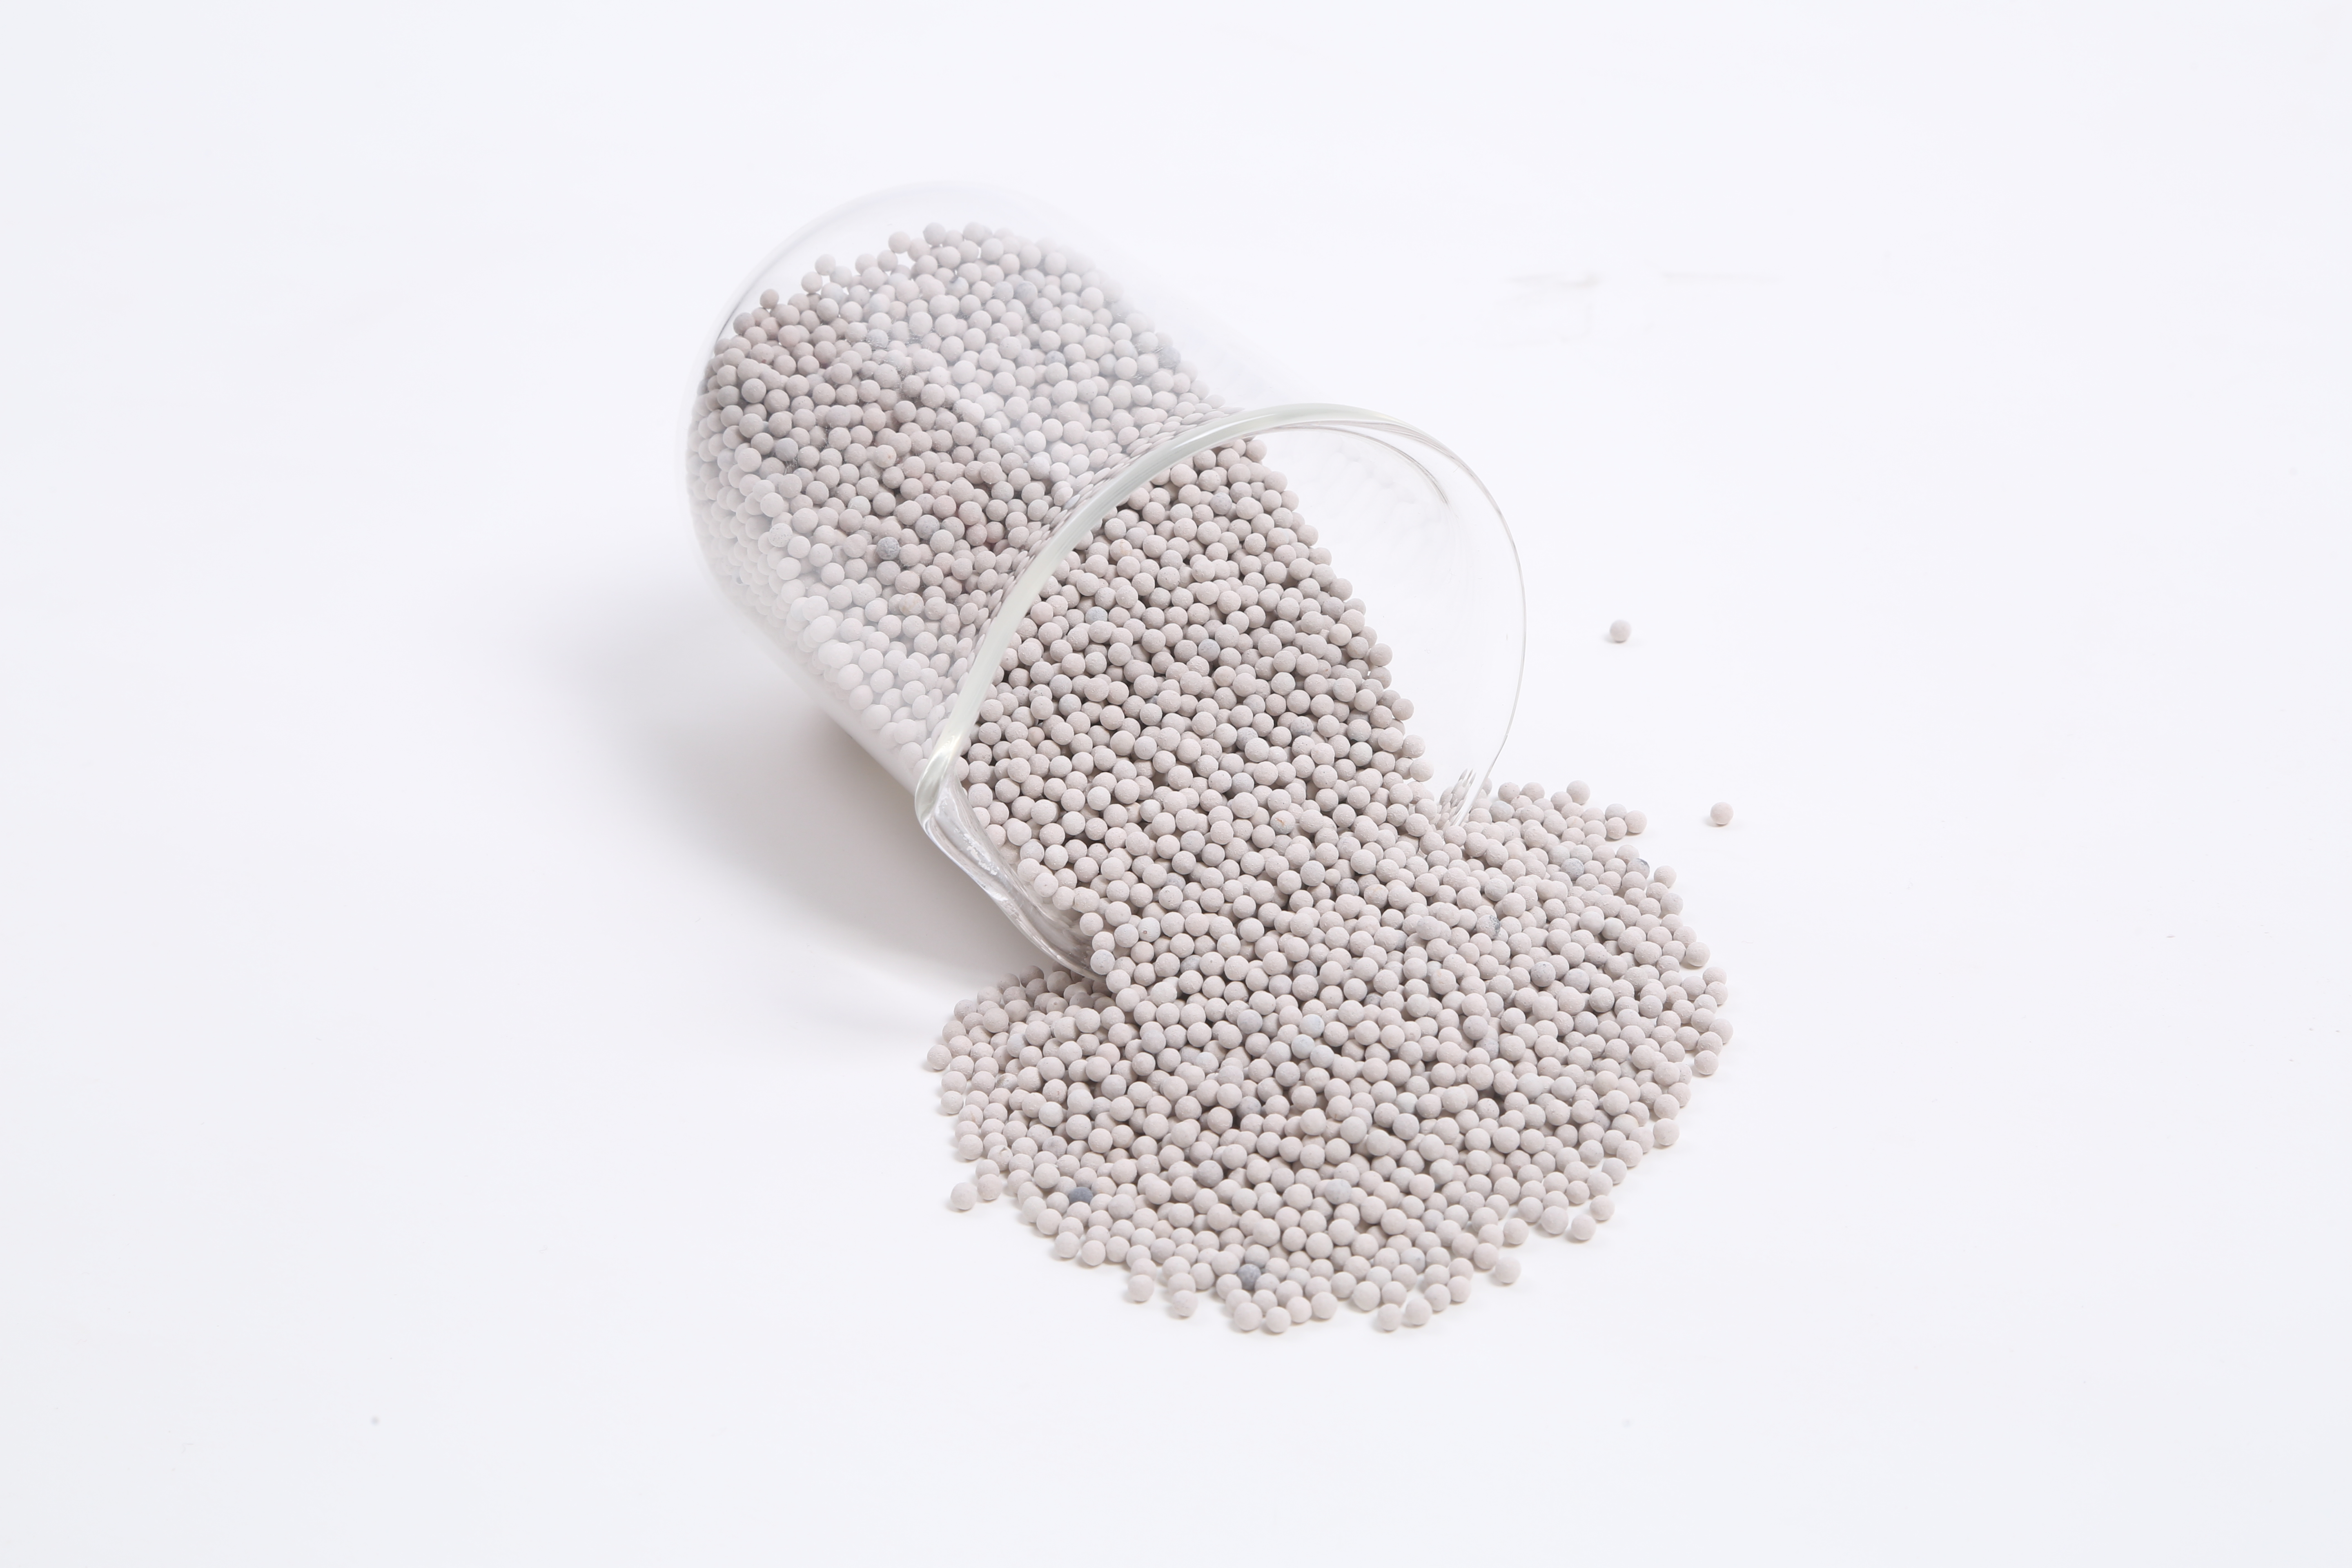 Research on Dechlorination of NAY Molecular Sieve